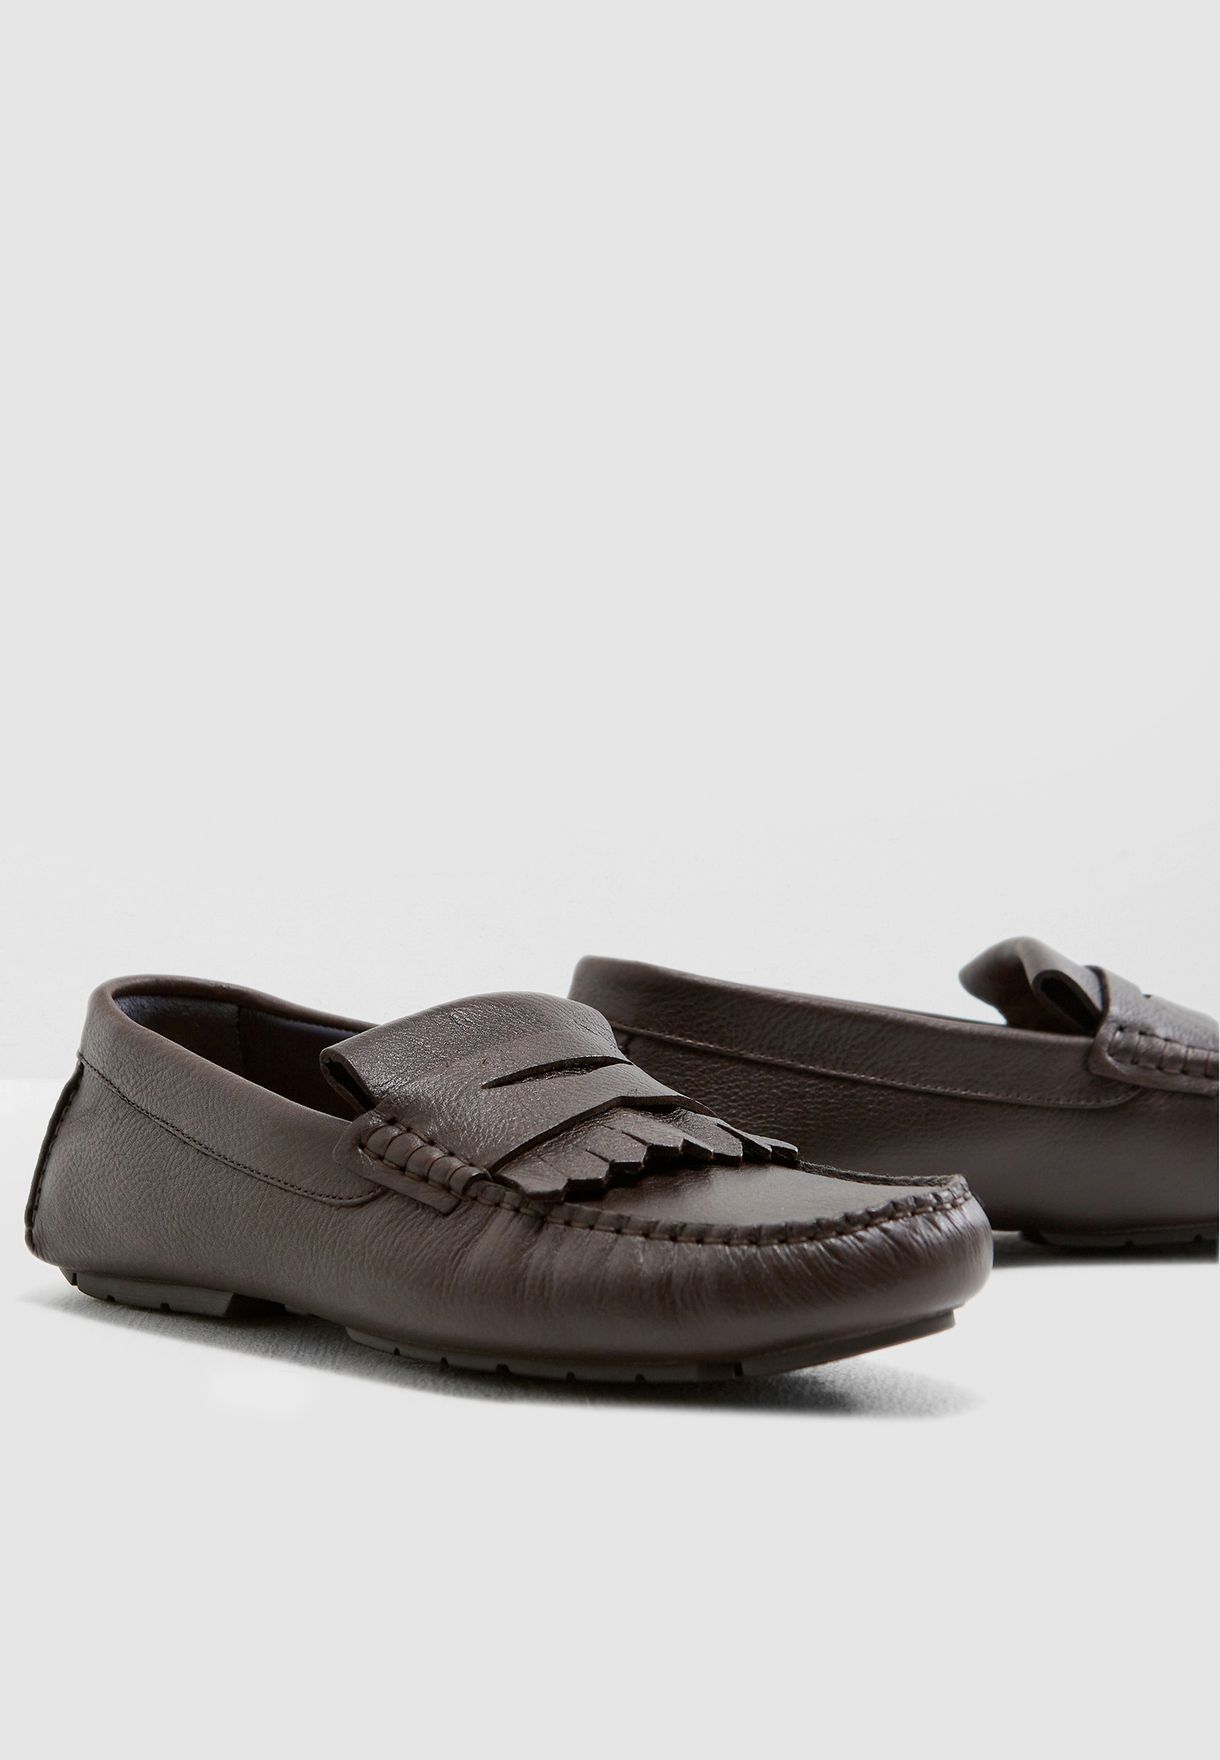 tommy hilfiger loafers brown